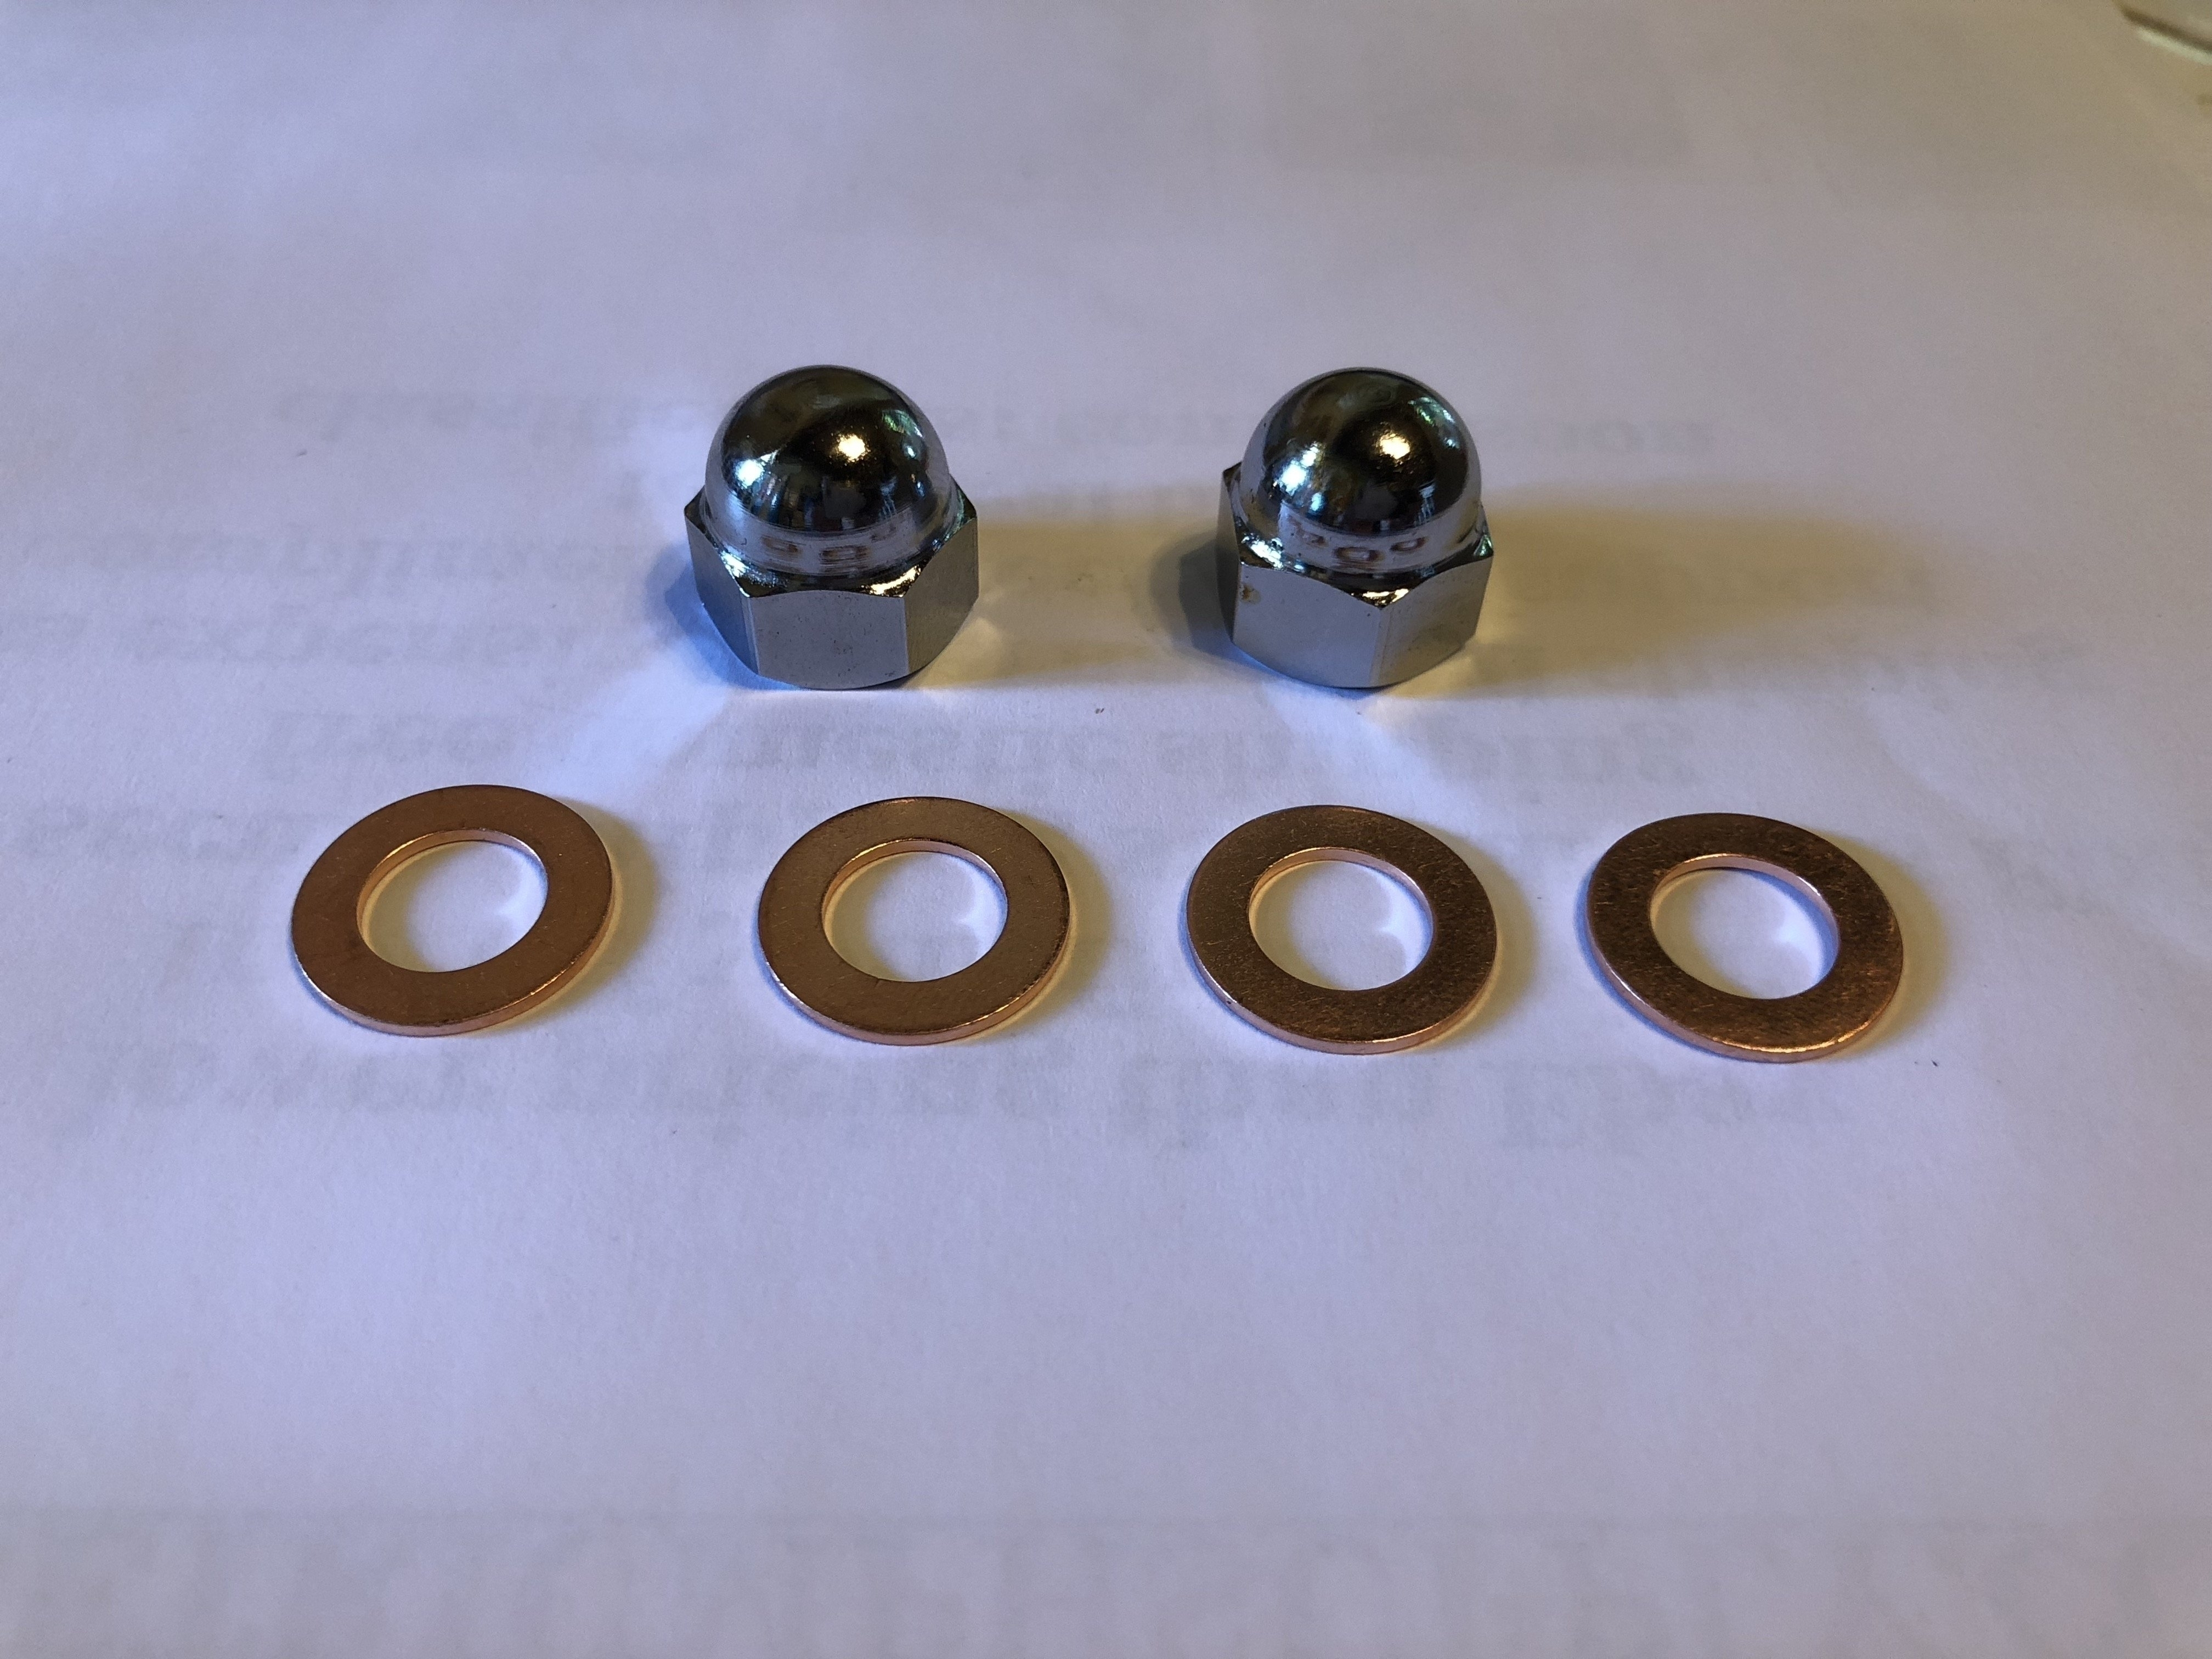 Acorn Domed Nuts rocker feed T120 TR6 T140 TR7 1950-82 w Washers for Triumph